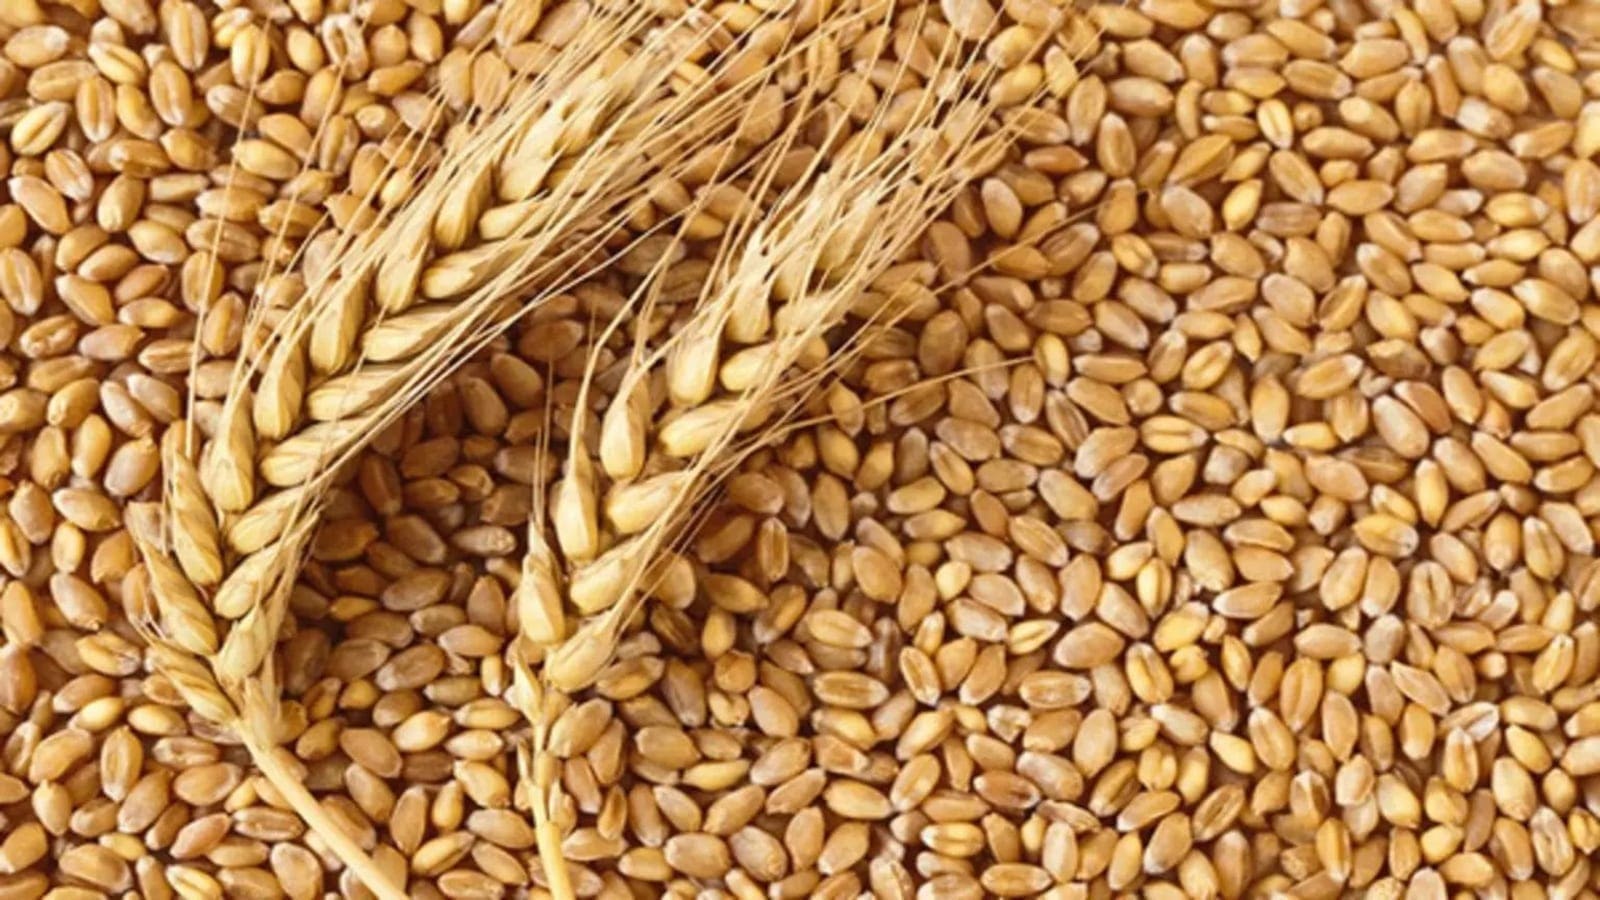 Kenya searches for alternative wheat source to meet high demand on back of Russia-Ukraine conflict